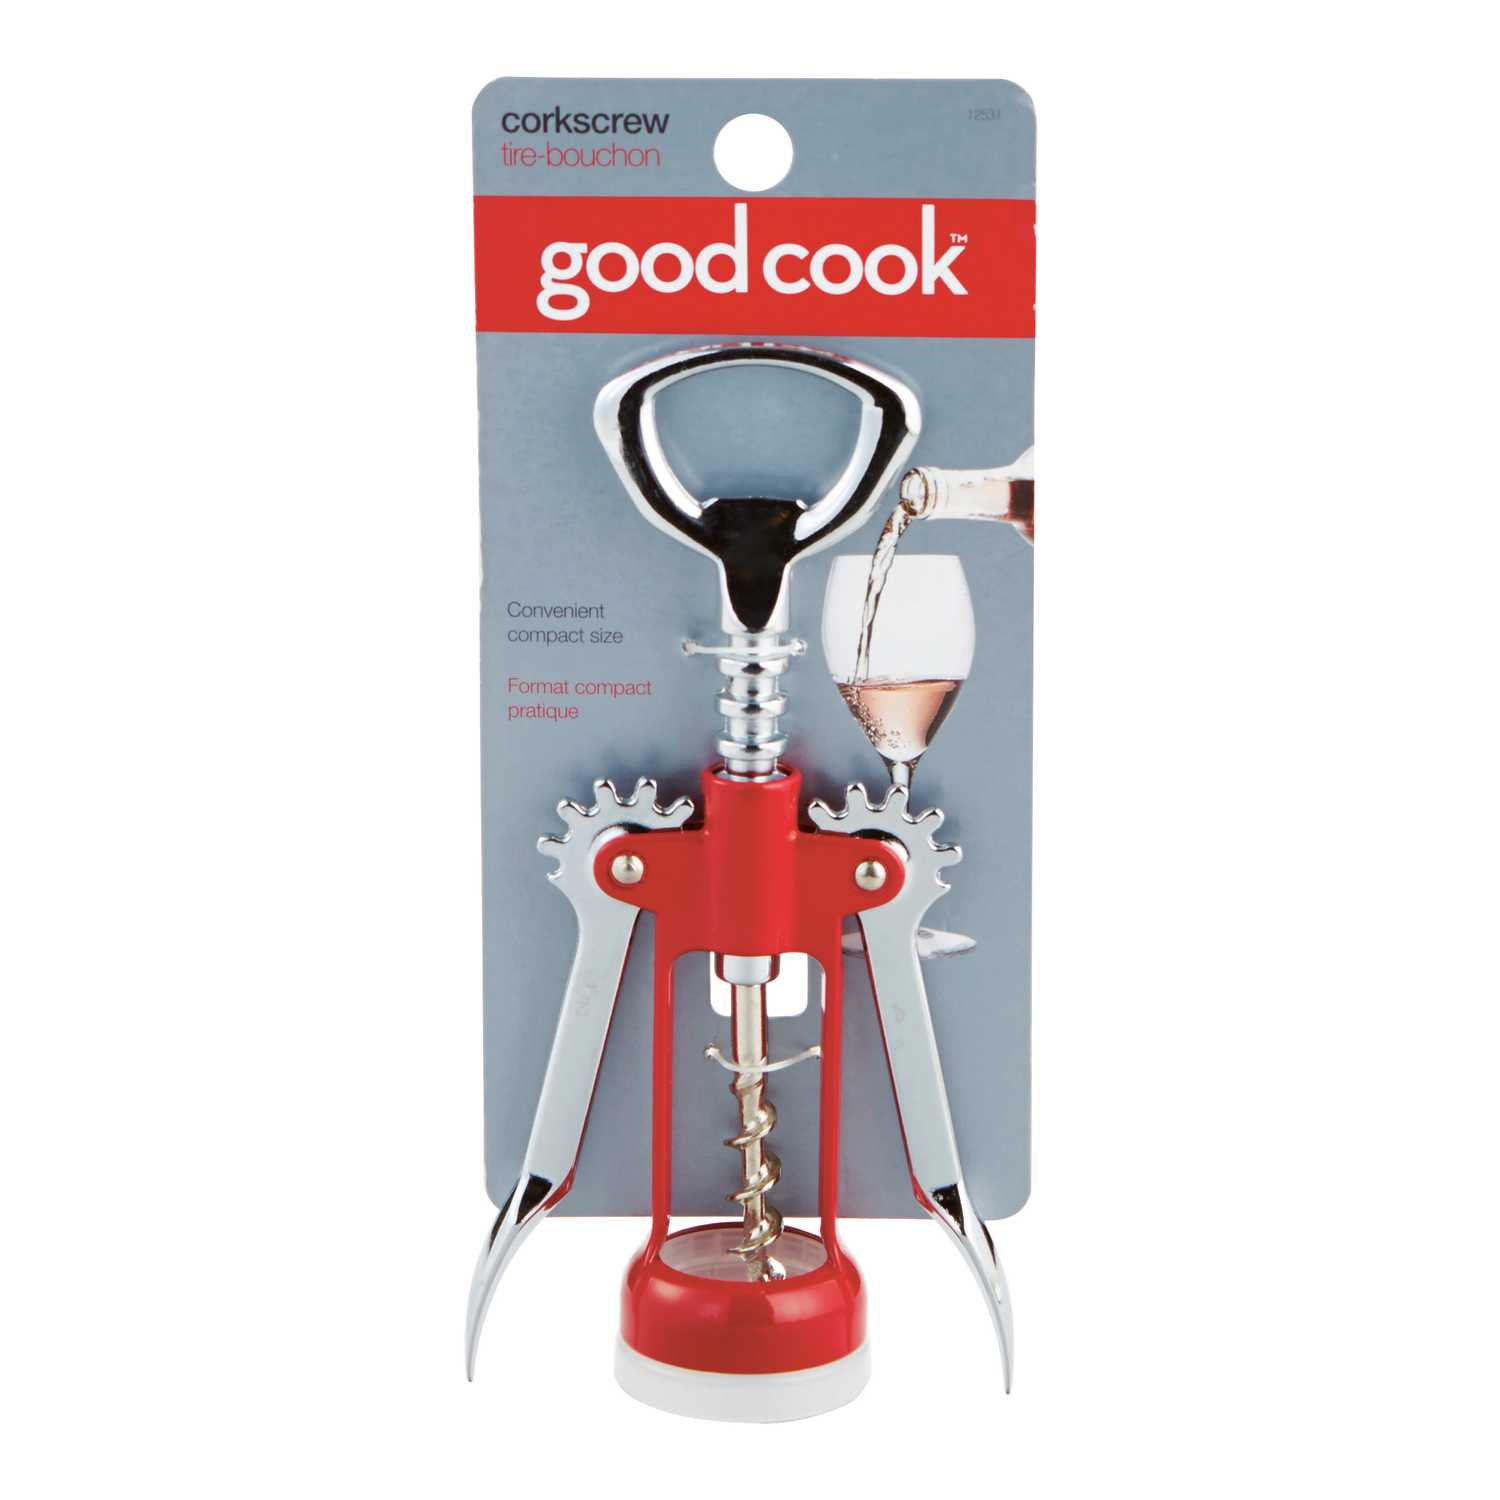 good cook travel corkscrew how to use